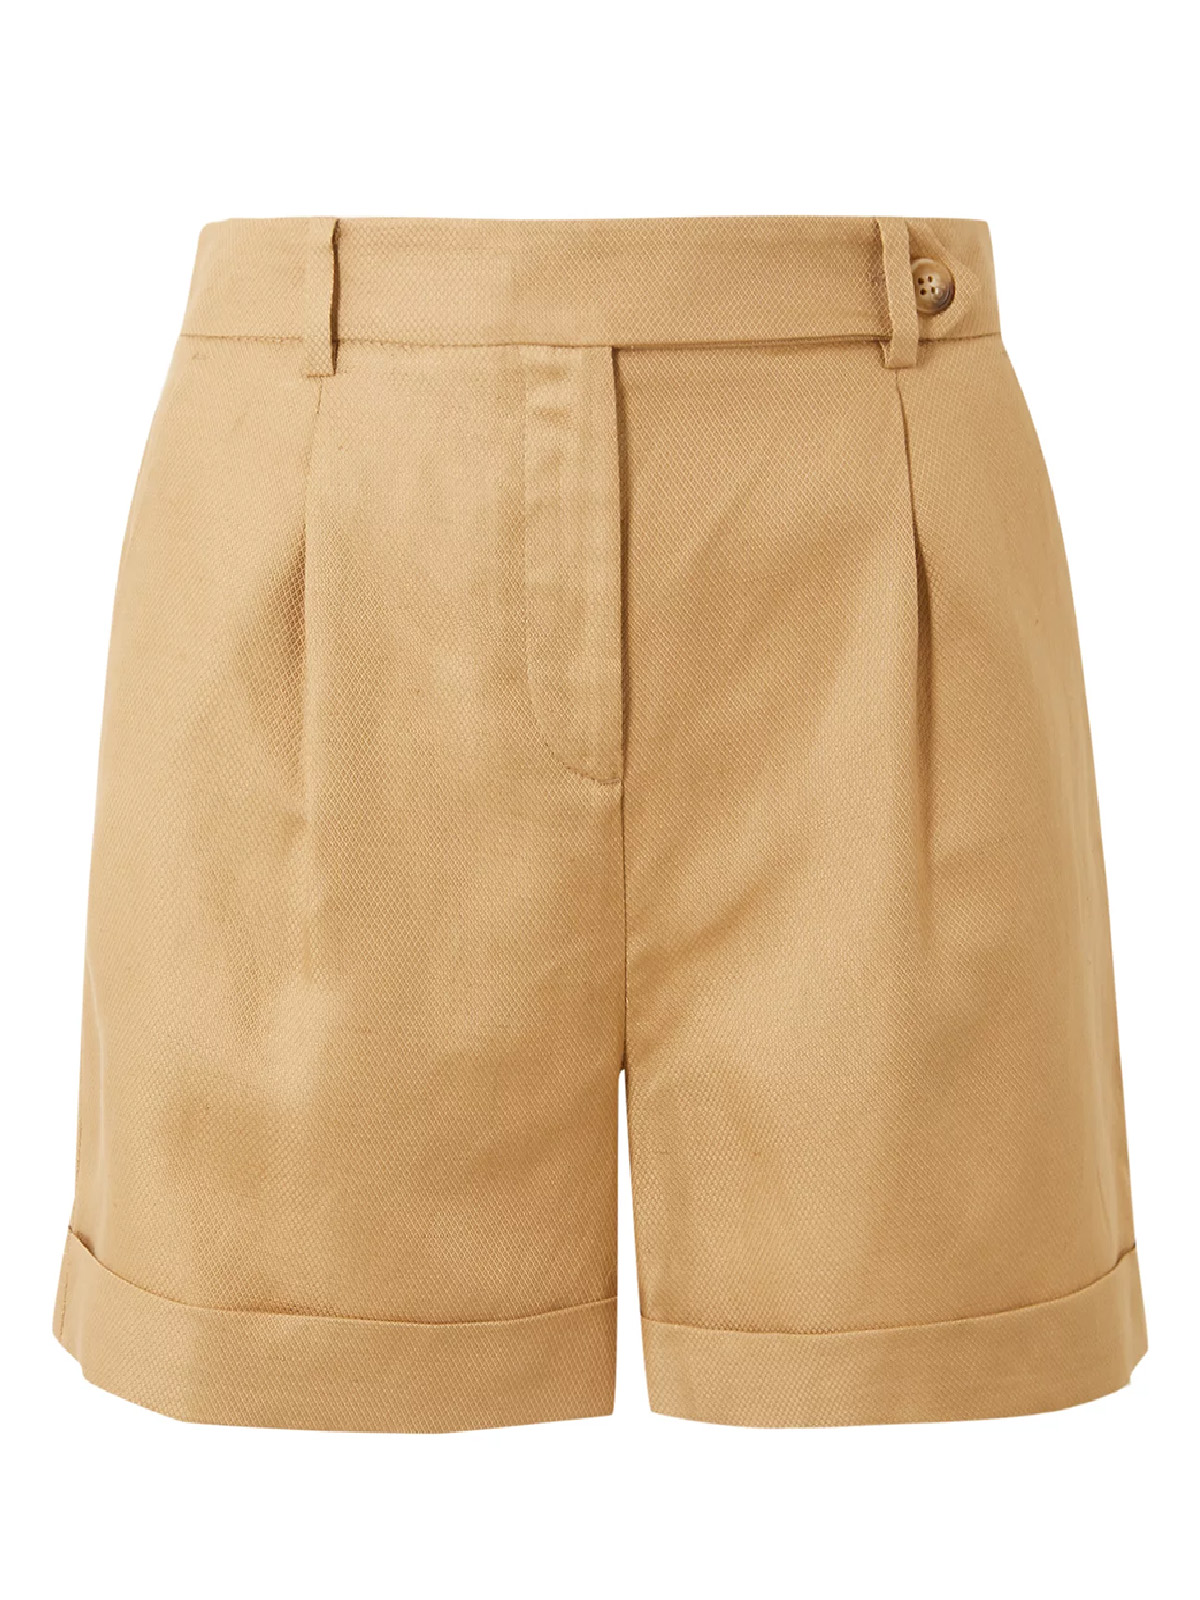 Marks and Spencer - - M&5 P3R UNA STONE Button Tab Casual Shorts with ...